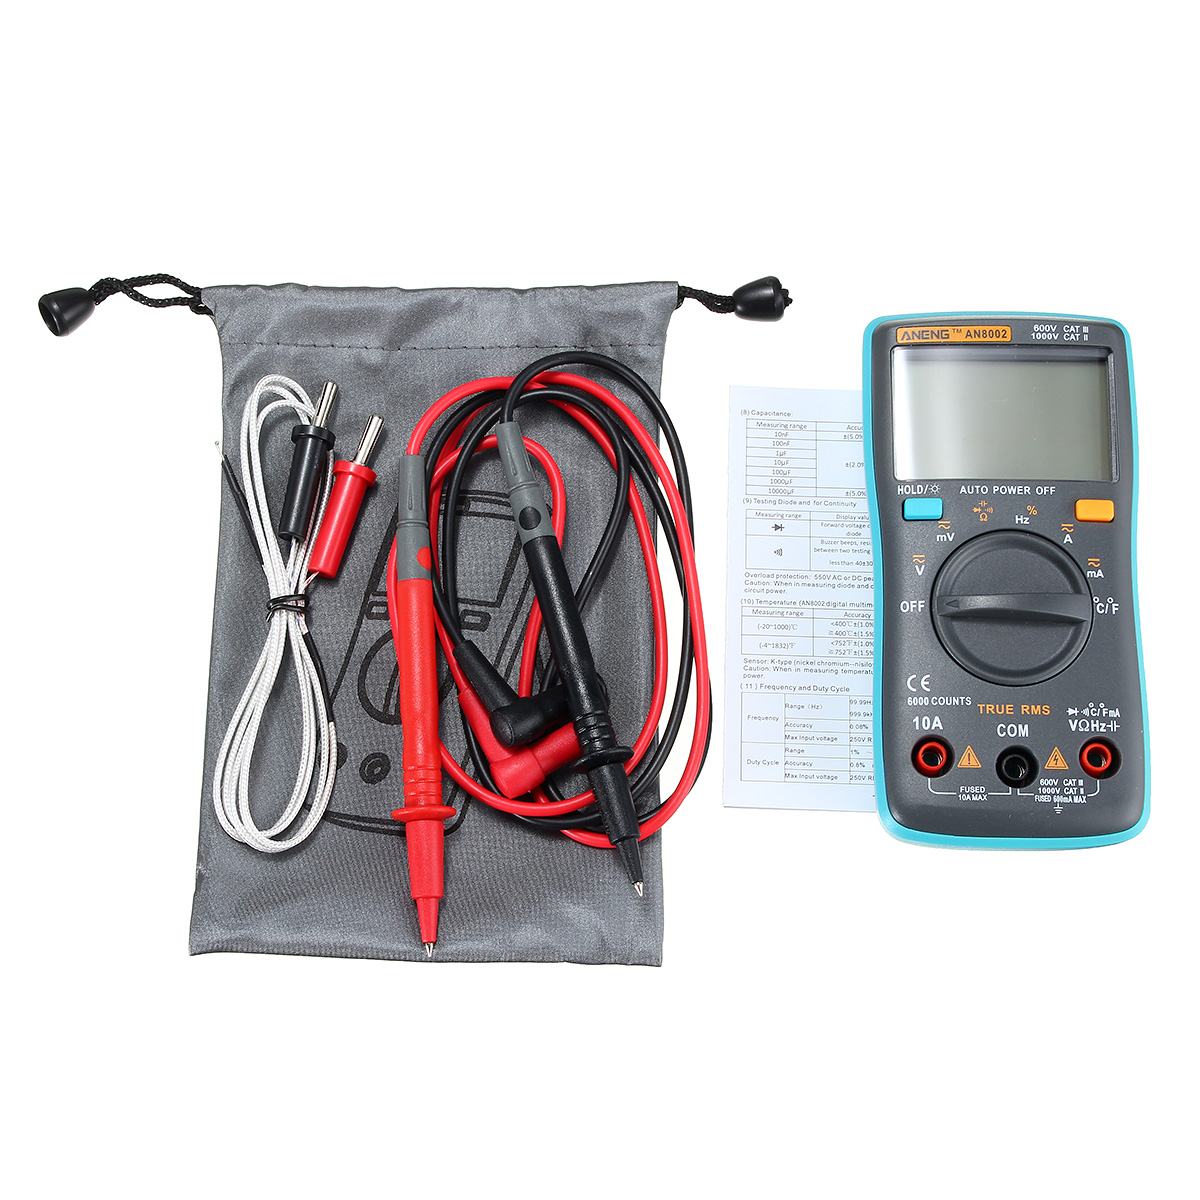 ANENG AN8002 Digital True RMS 6000 Counts Multimeter AC/DC Current Voltage Frequency Resistance Temperature Tester ℃/℉ 168